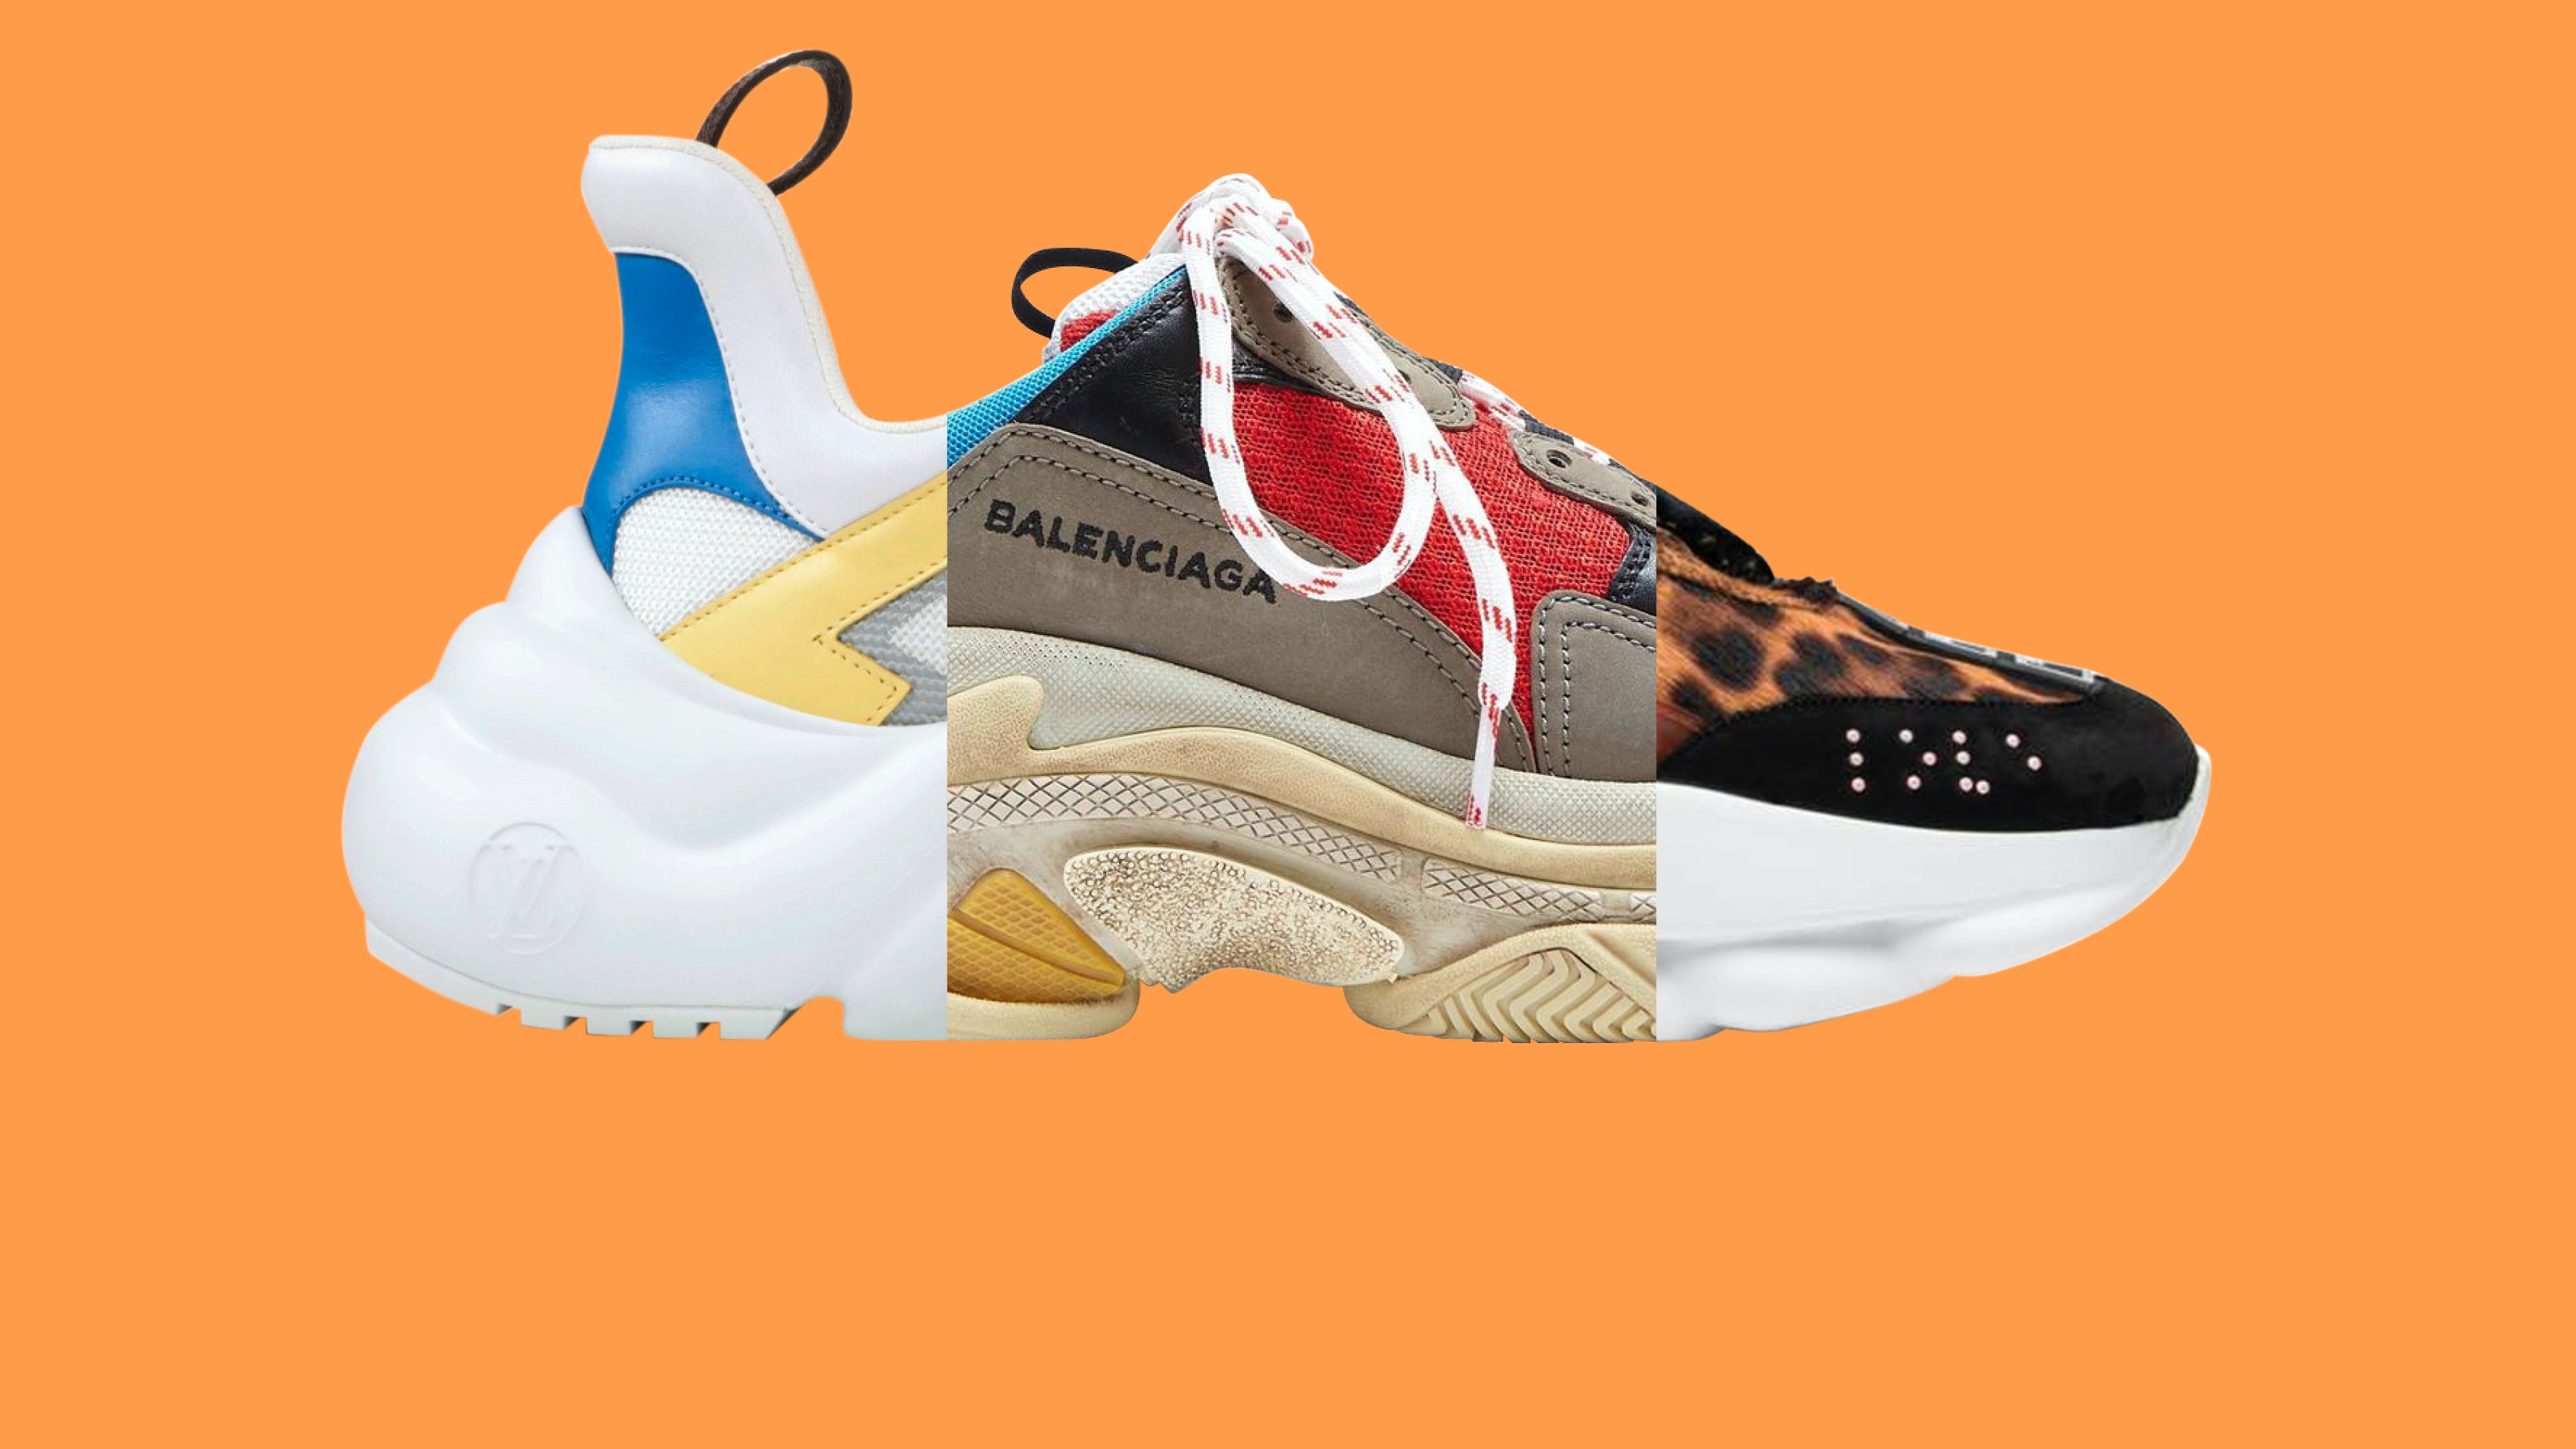 28 Luxury Sneakers For Men To Invest In - my fashion life